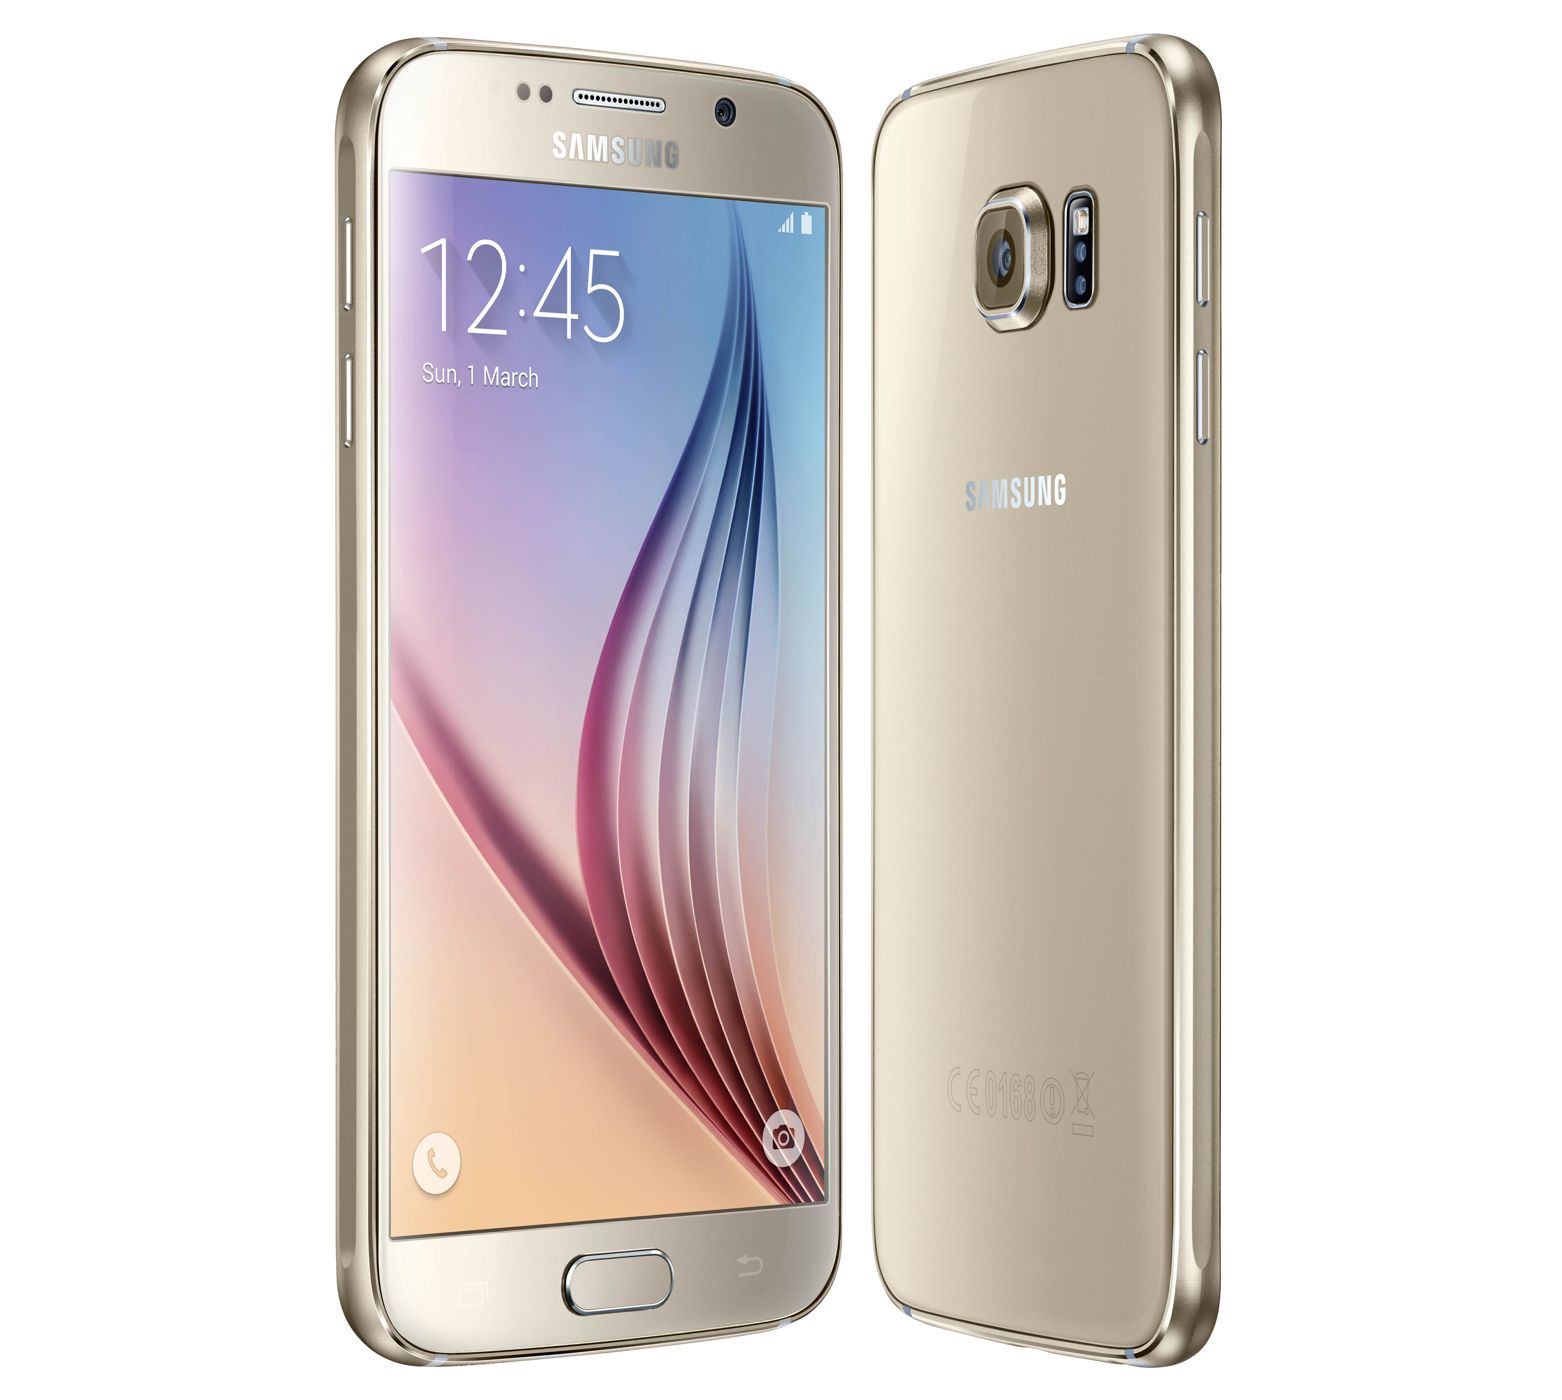 buy Cell Phone Samsung Galaxy S6 SM-G920V 32GB - Platinum Gold - click for details